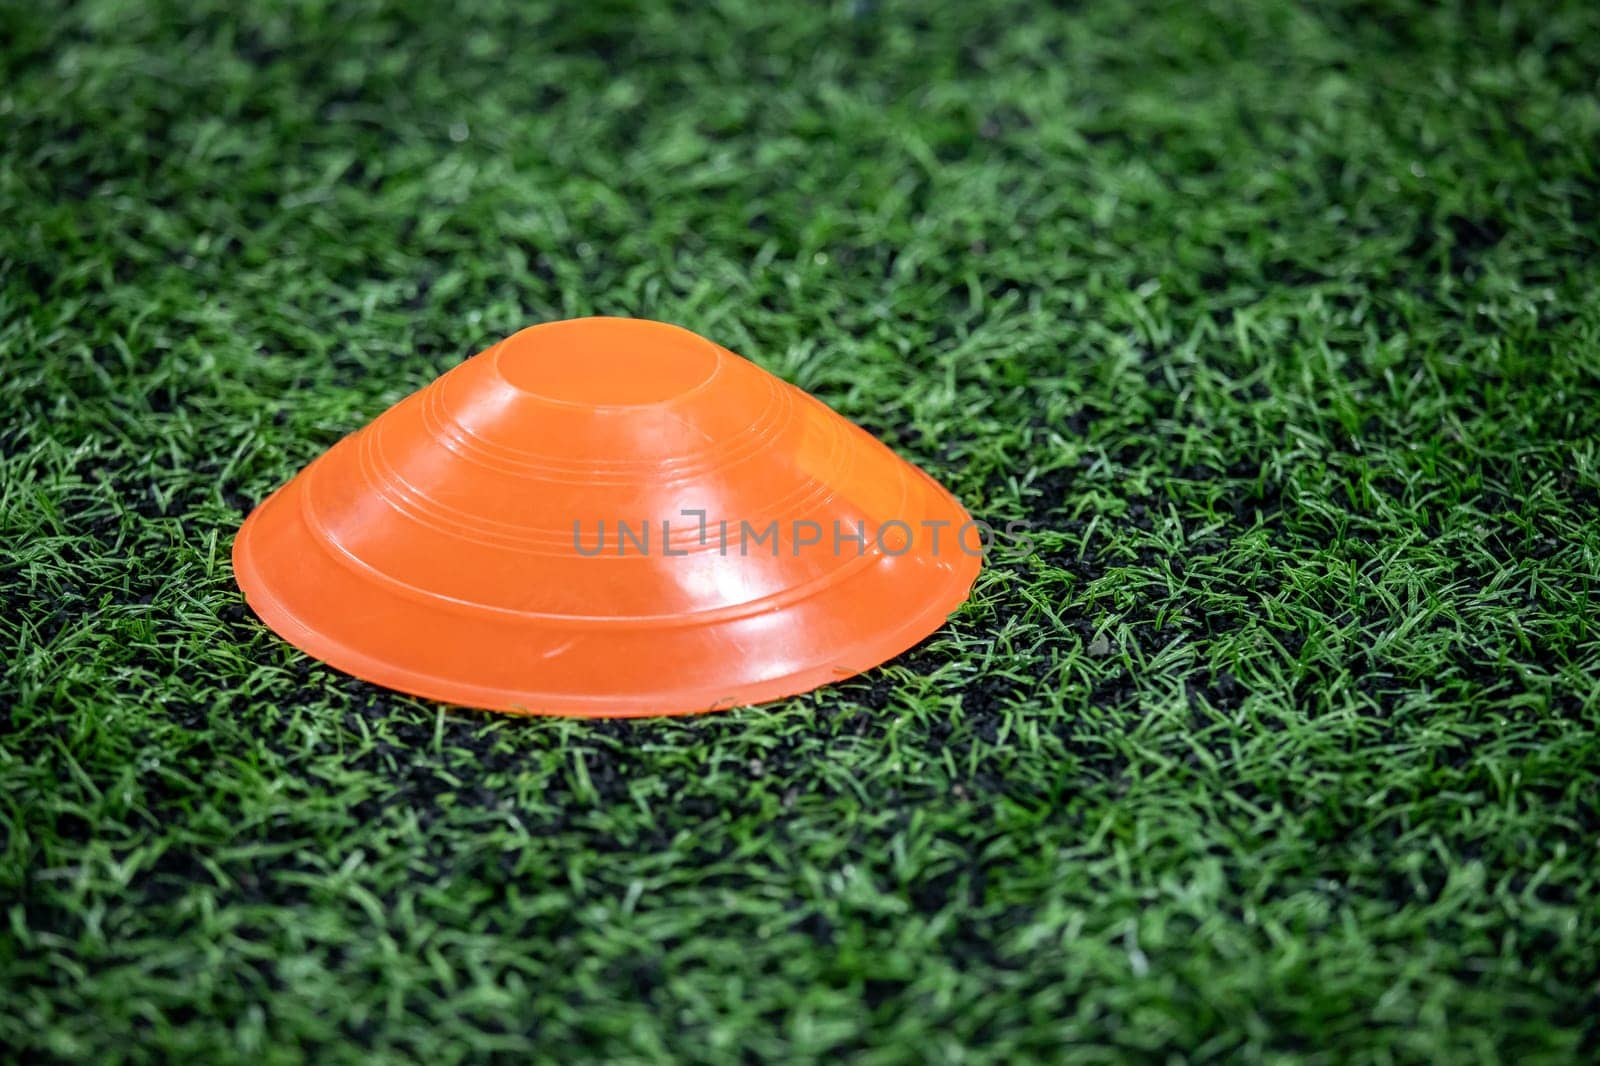 a pyramidal orange football cone on a green artificial turf. space for copying.